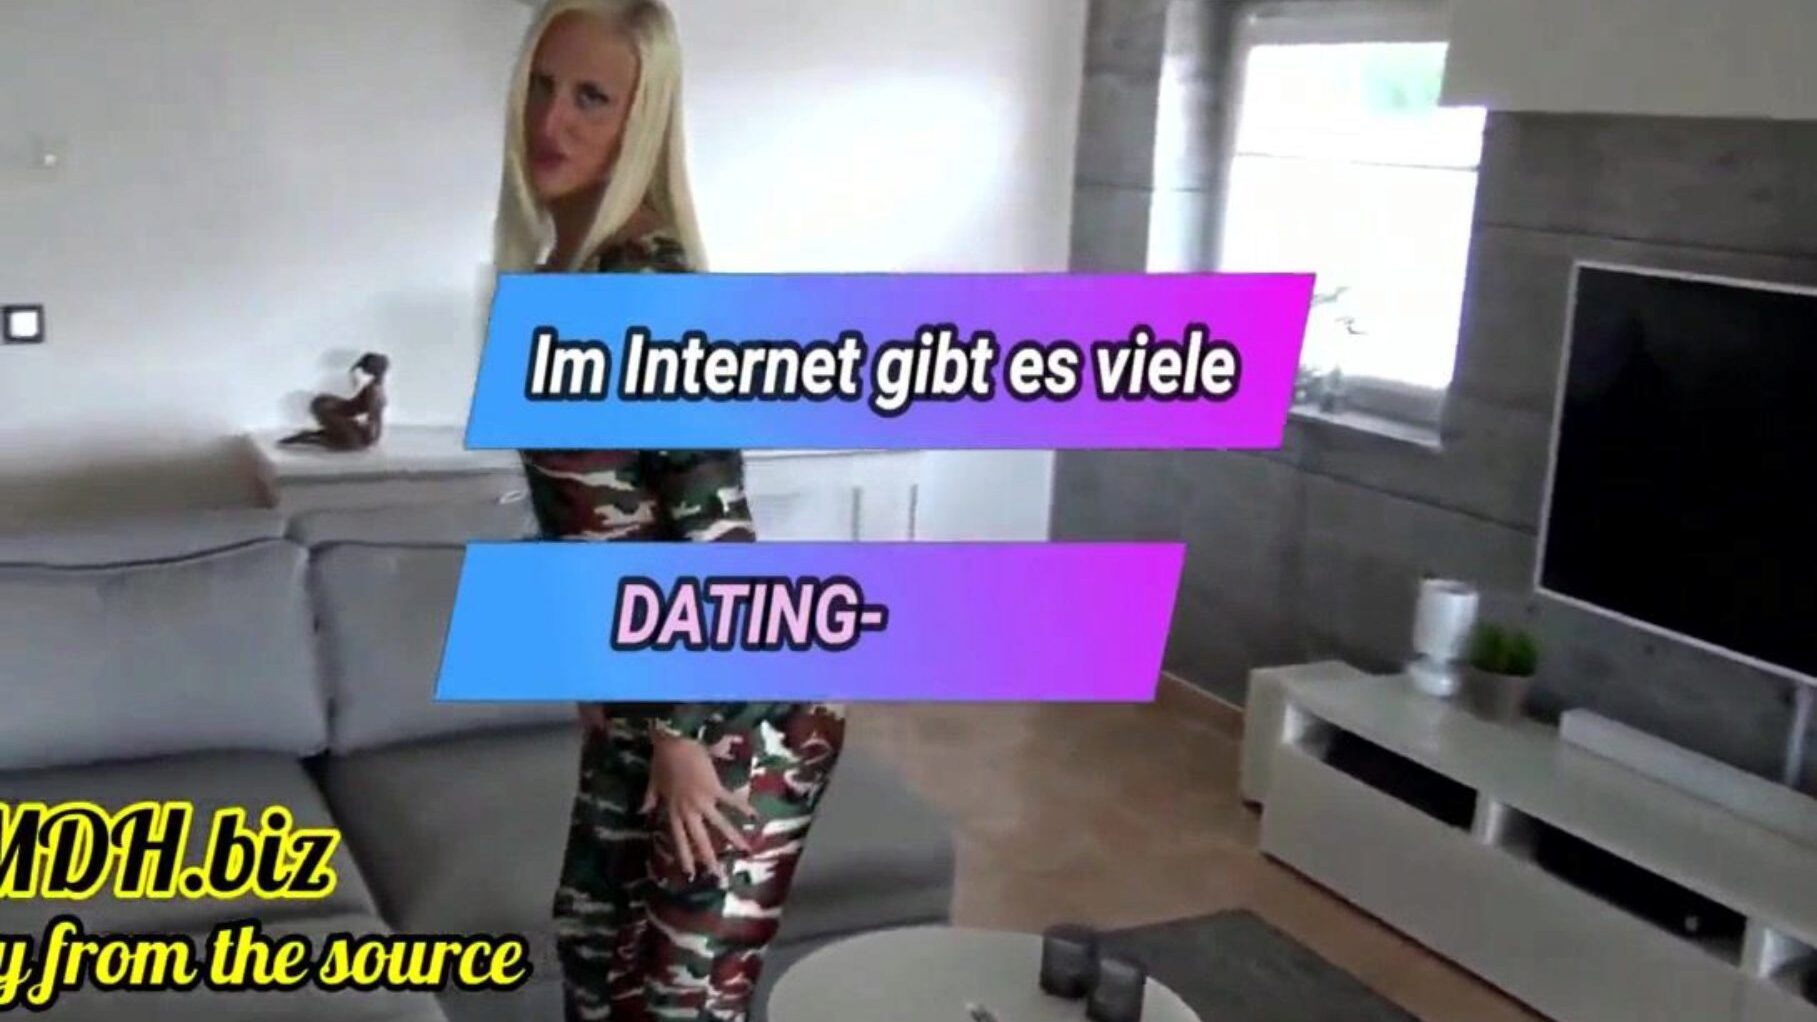 grob arsch deutsche mother i'd like to fuck gefickt hart - riesiger cumshot watch grob arsch deutsche mother i'd like to fuck gefickt hart - riesiger cumshot film scene on xhamster - the ultimate database of free-for-all german squirting hd porno tube filmy